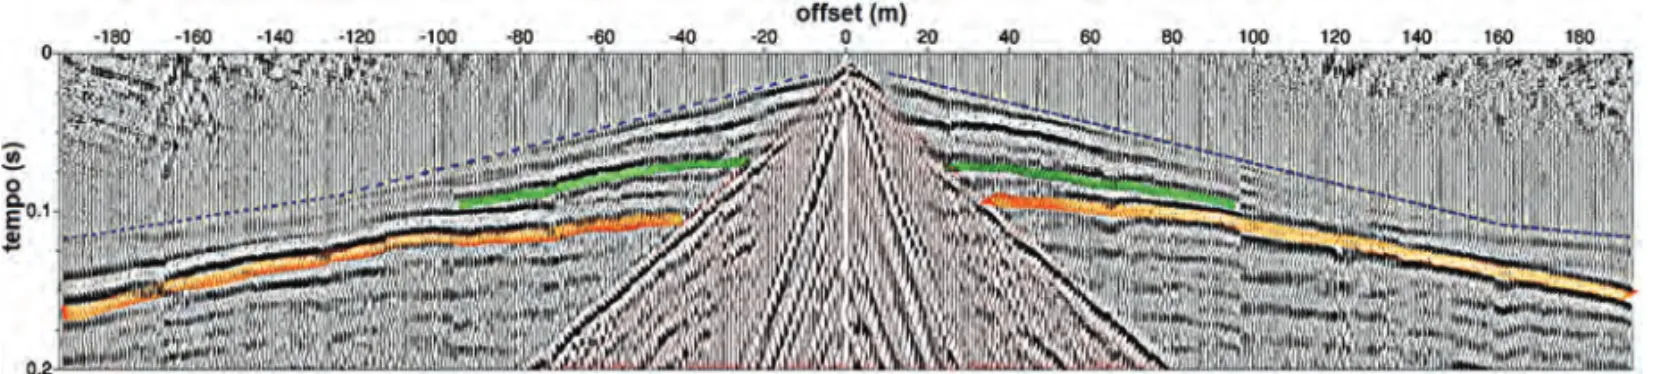 Figure 2 – Seismograms of the walkaway noise tests at location LII. The blue dashed line corresponds to the refraction event, the red area, to the surface waves.